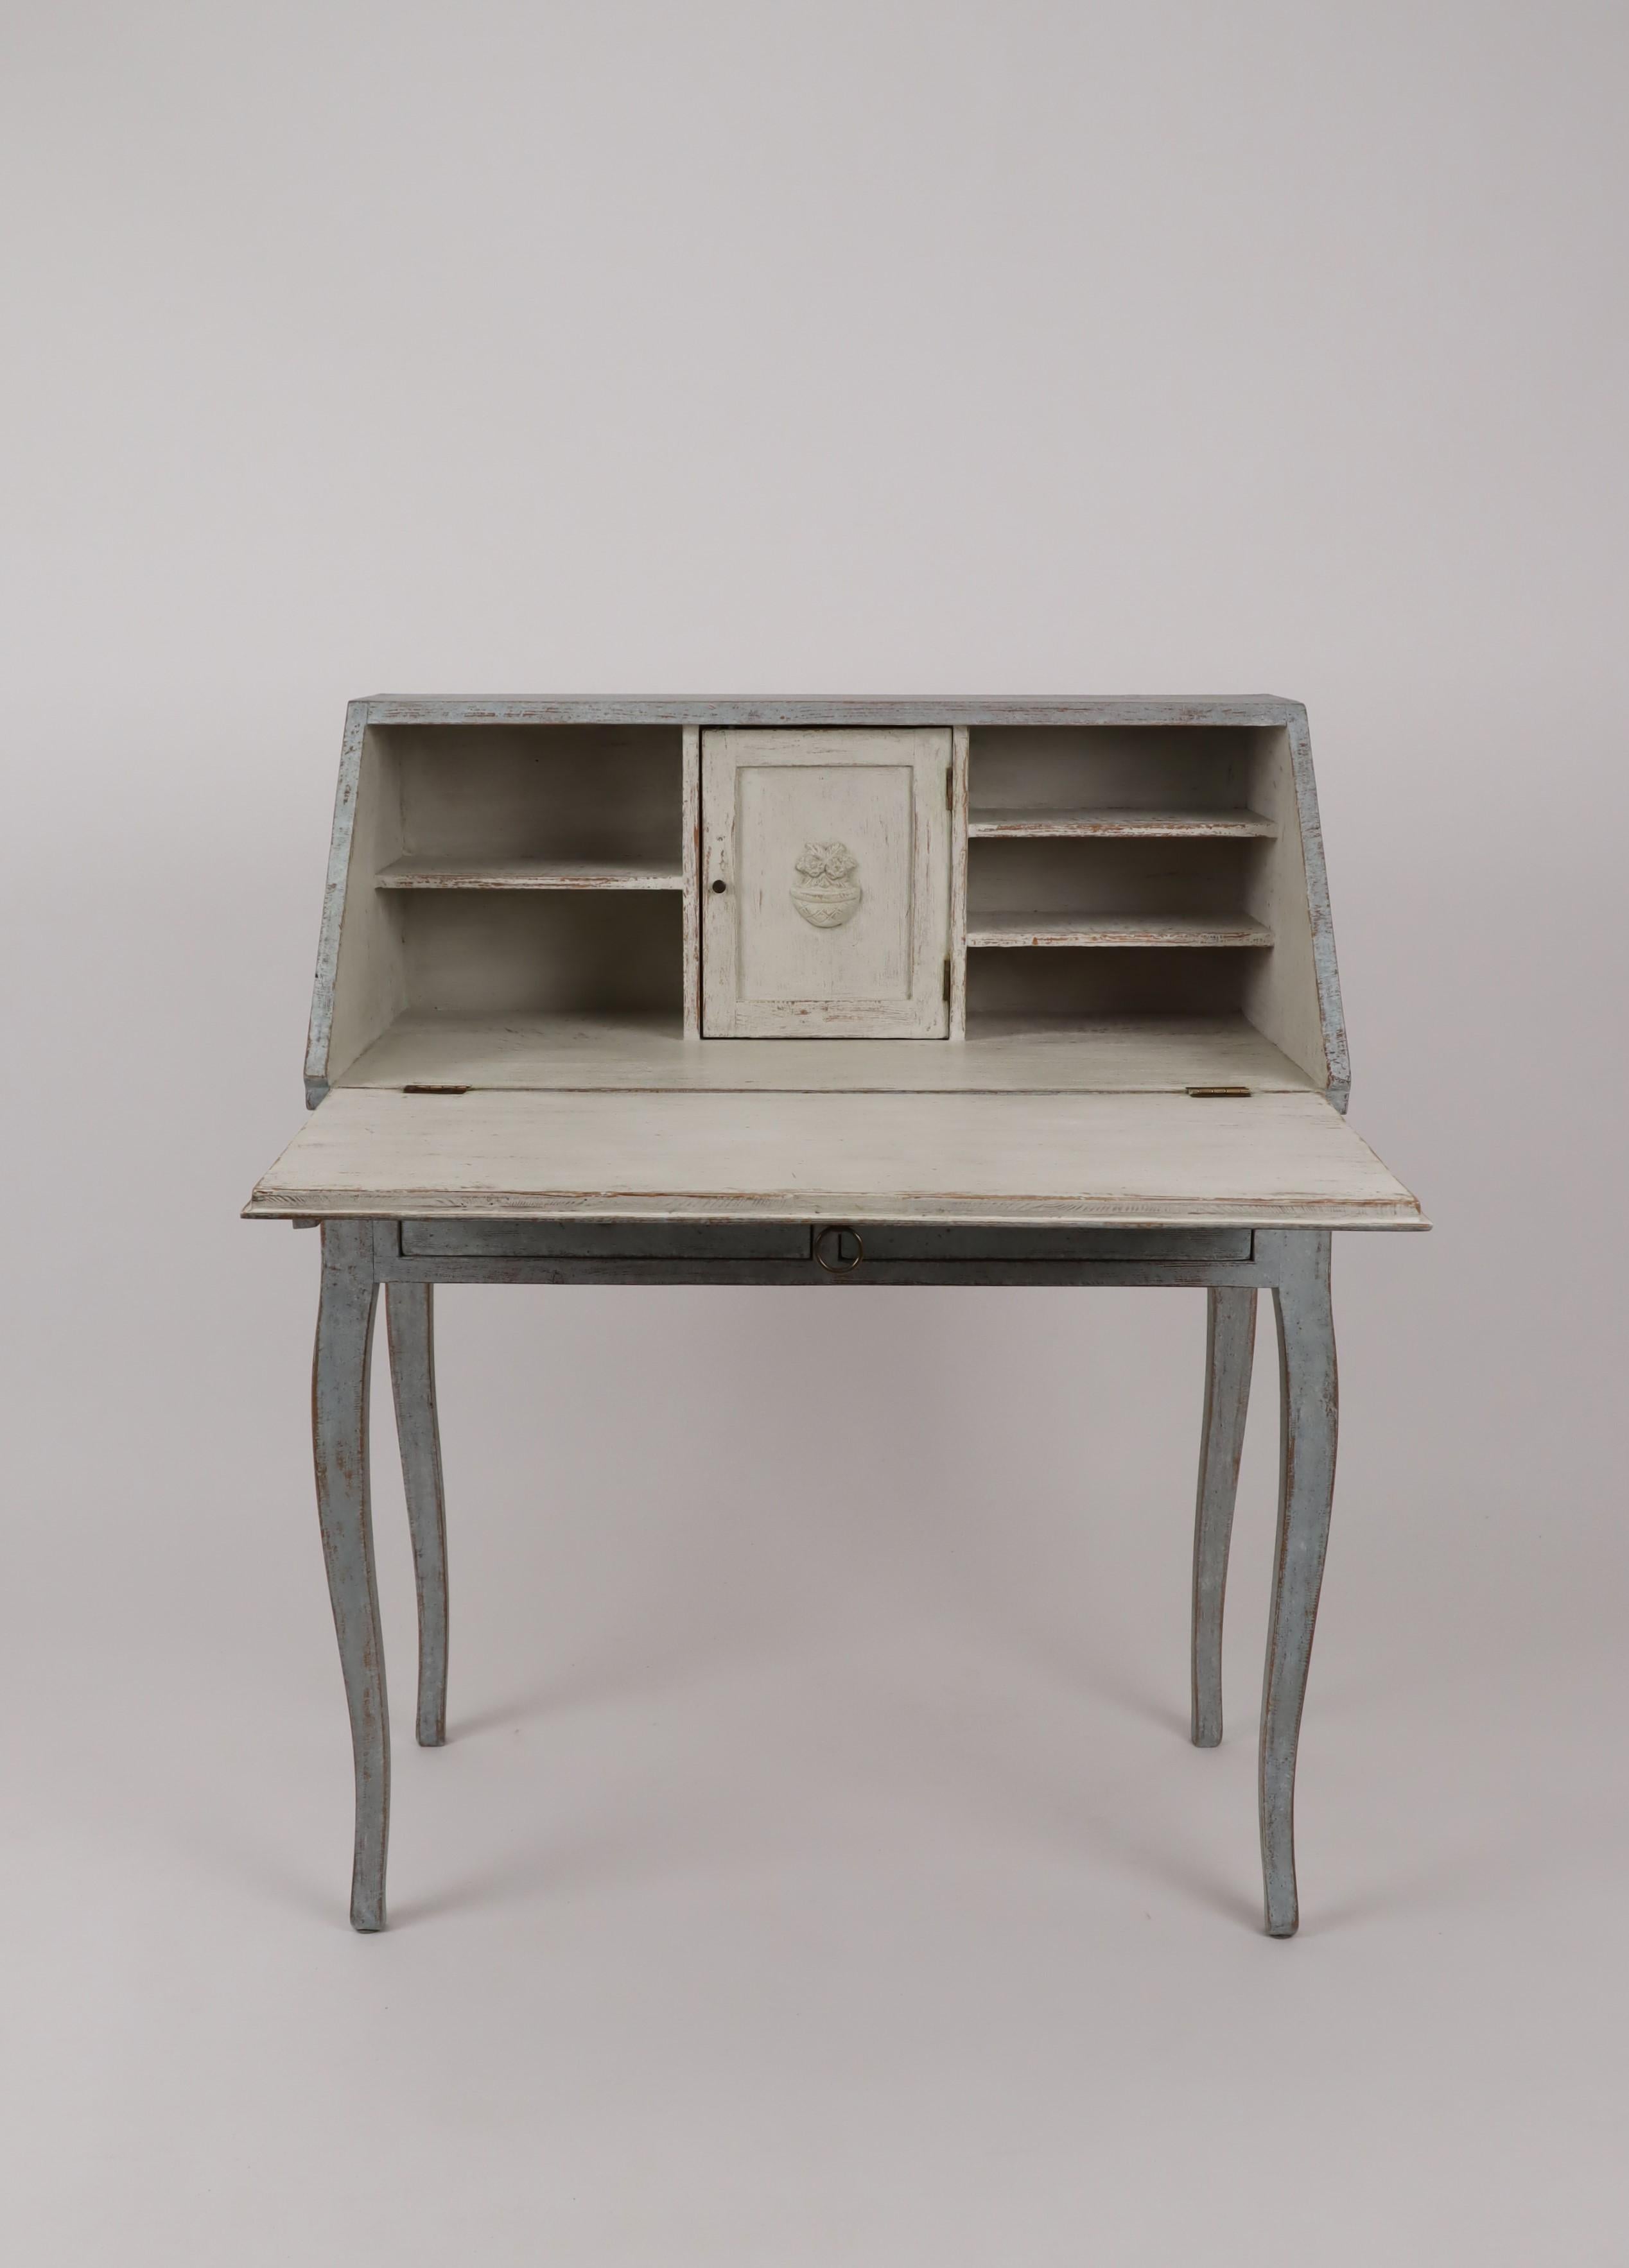 A Swedish slant-front desk from circa 1880 with blue gray painted finish, carved panels, two drawers and cabriole legs. Embrace the understated elegance of Swedish design with this exquisite slant-front desk from circa 1880. Its captivating